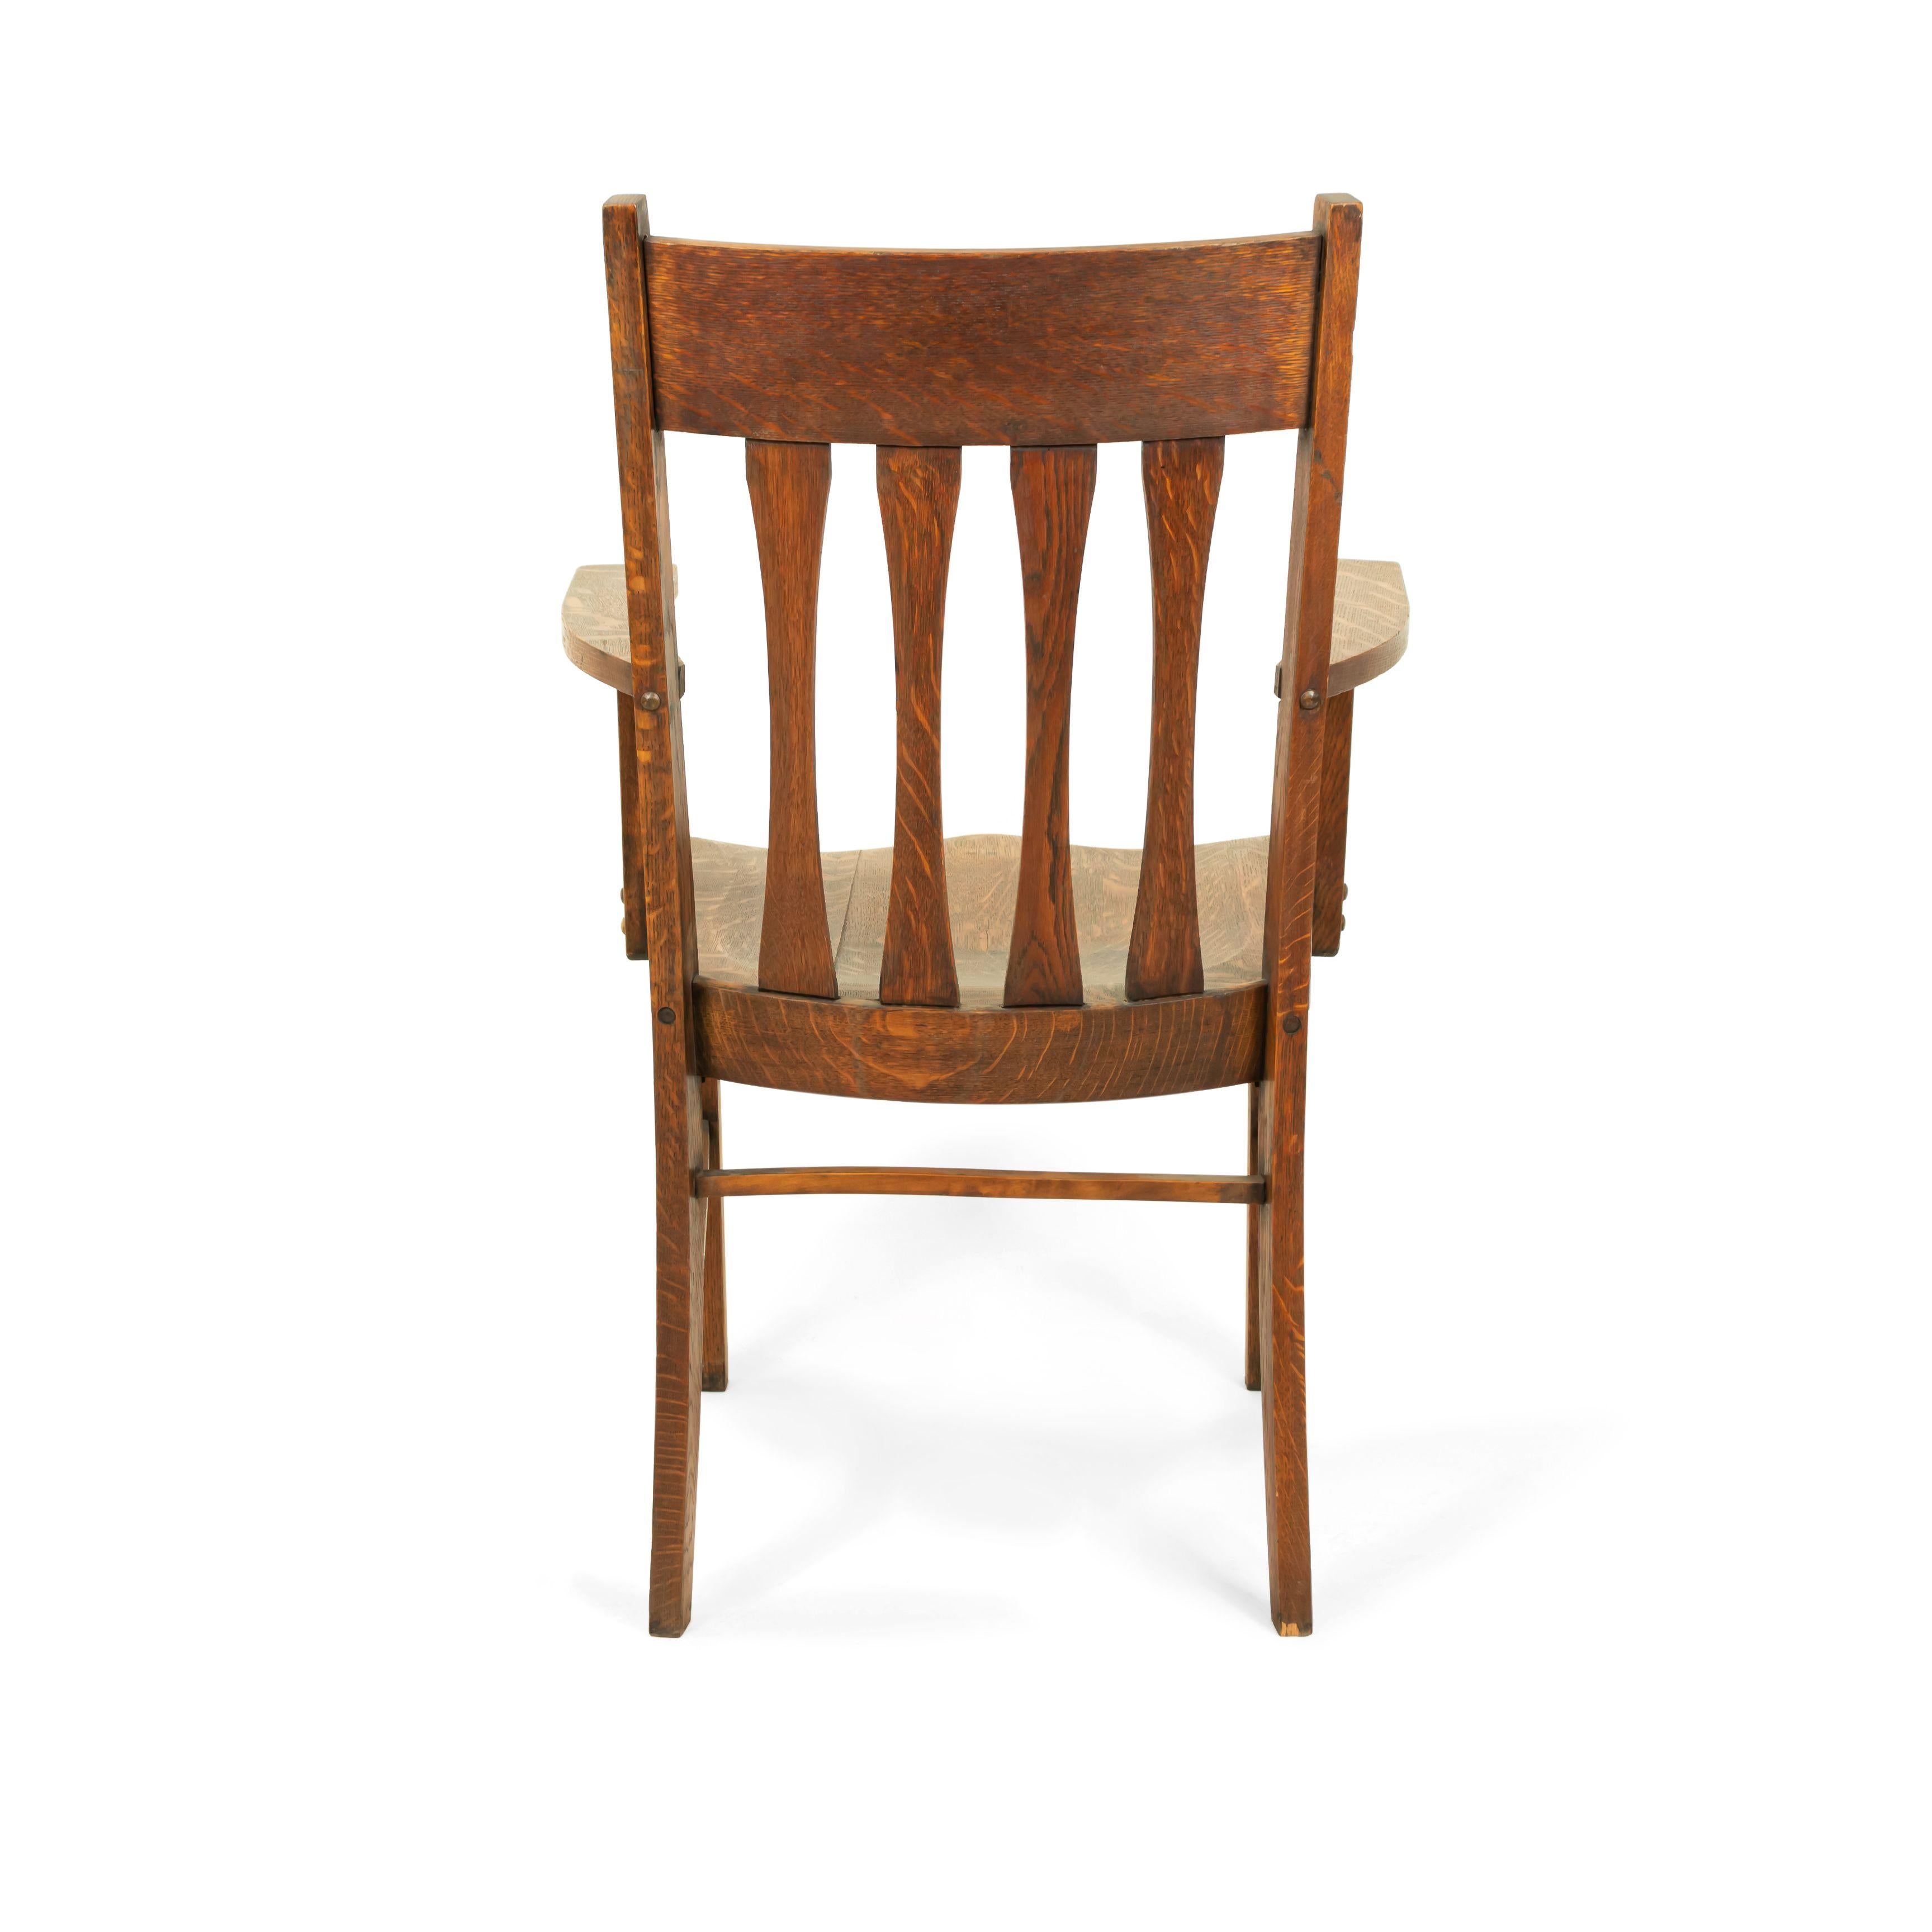 20th Century American Mission Slat Back Wooden Armchair For Sale